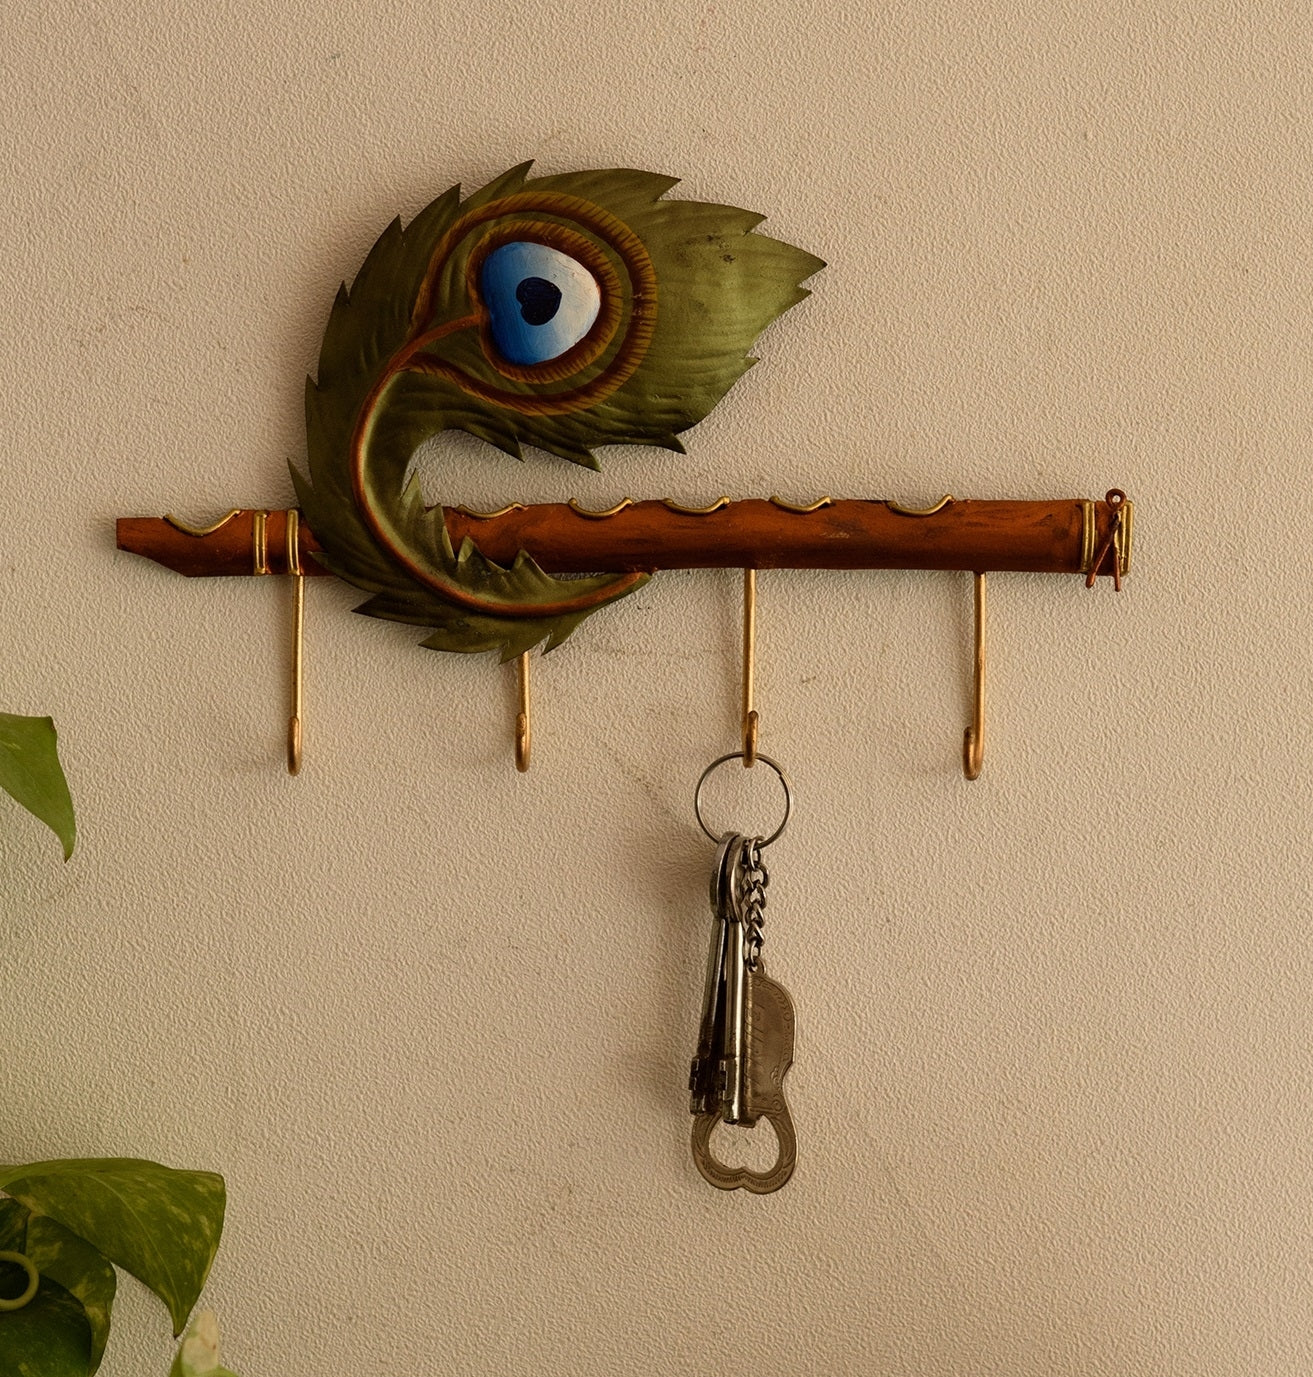 Wrought Iron basuri with mor pankh
Key Holder (Green and Brown)